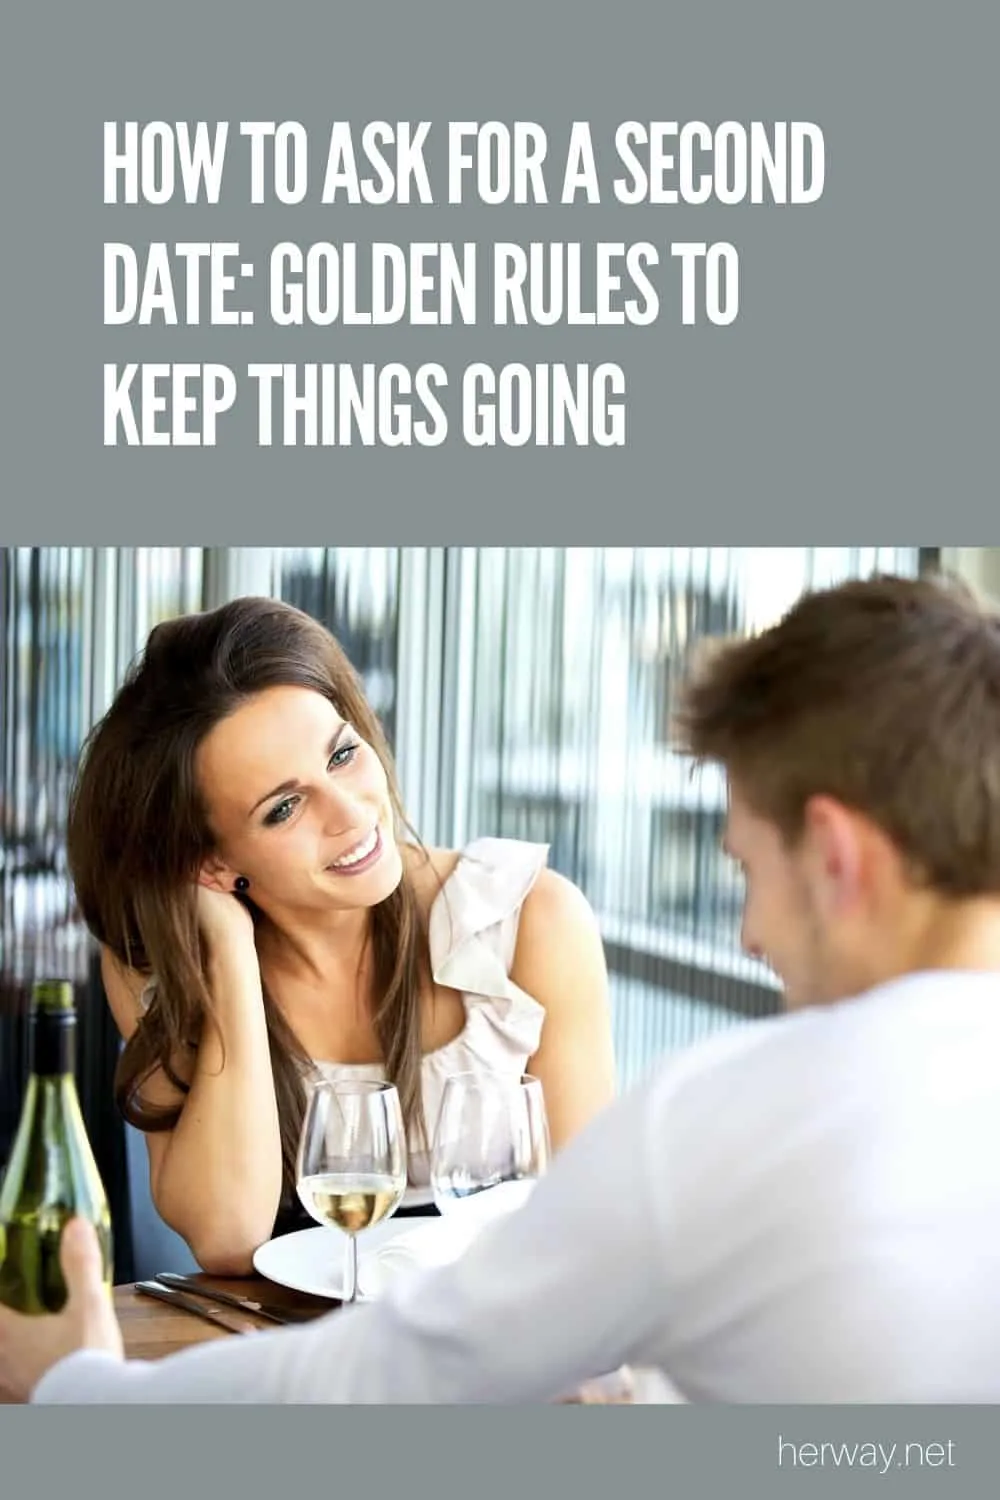 How To Ask For A Second Date: Golden Rules To Keep Things Going